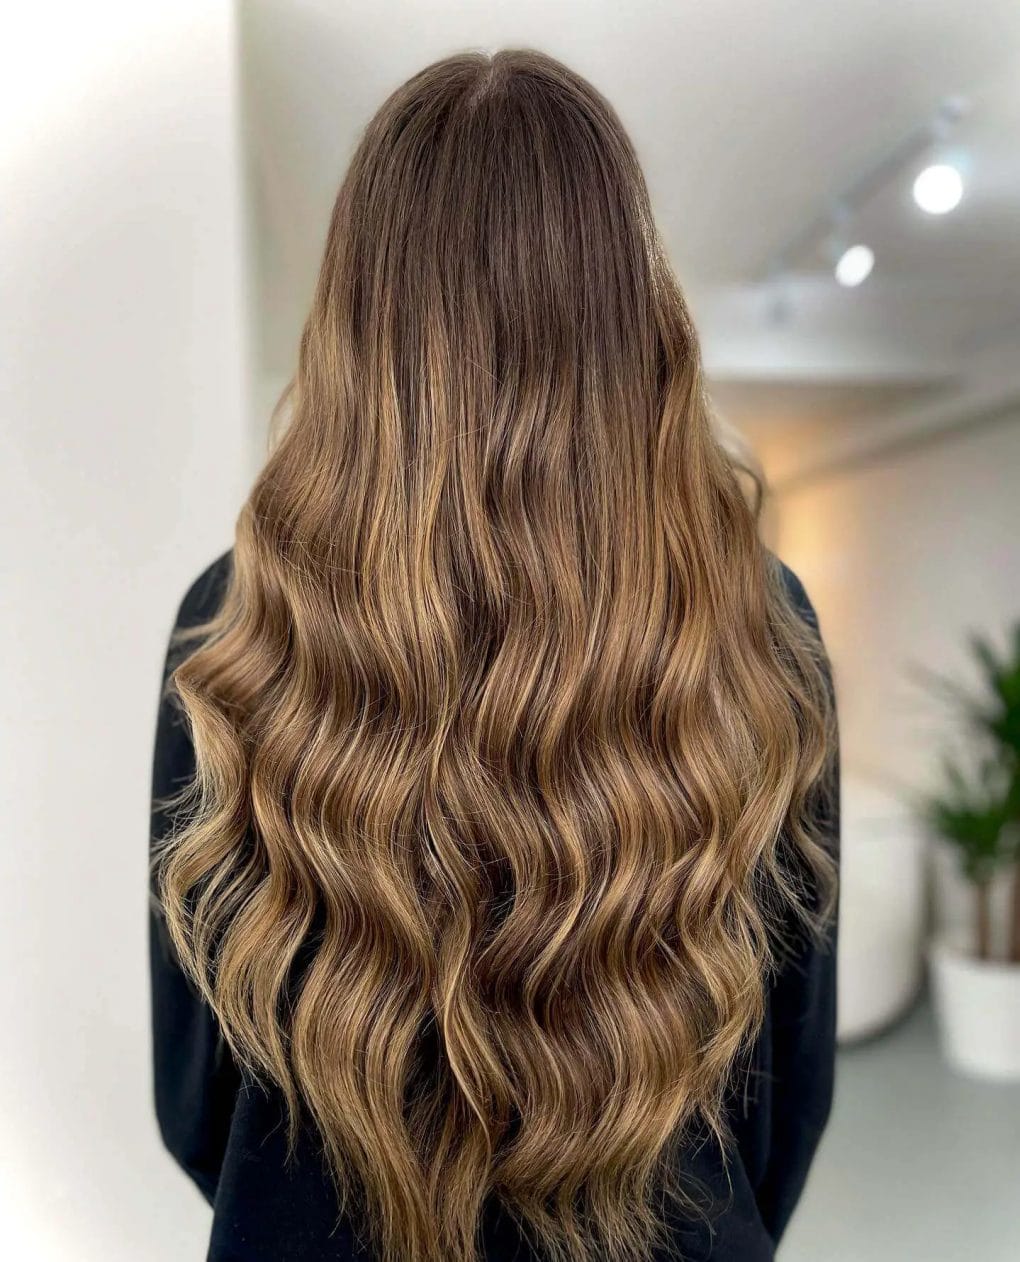 Sun-kissed balayage on flowing brunette hair.